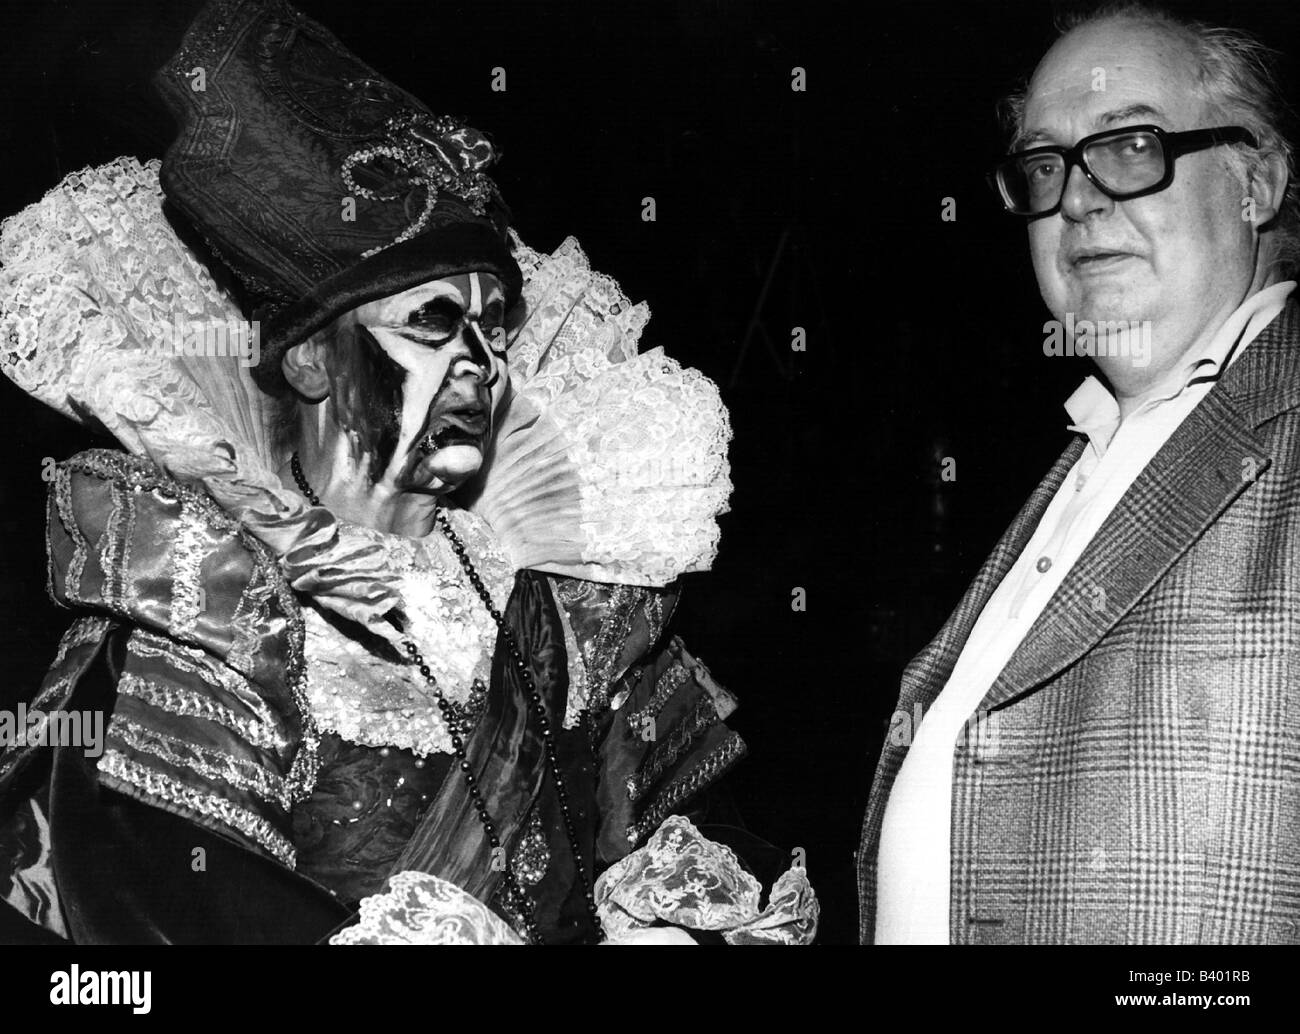 Duerrenmatt, Friedrich, 5.1.1921 - 14.12.1990, Swiss author, with Rosel Schaefer during a rehearsal for 'Die Frist' (The time limit), circa 1970, half length, Stock Photo